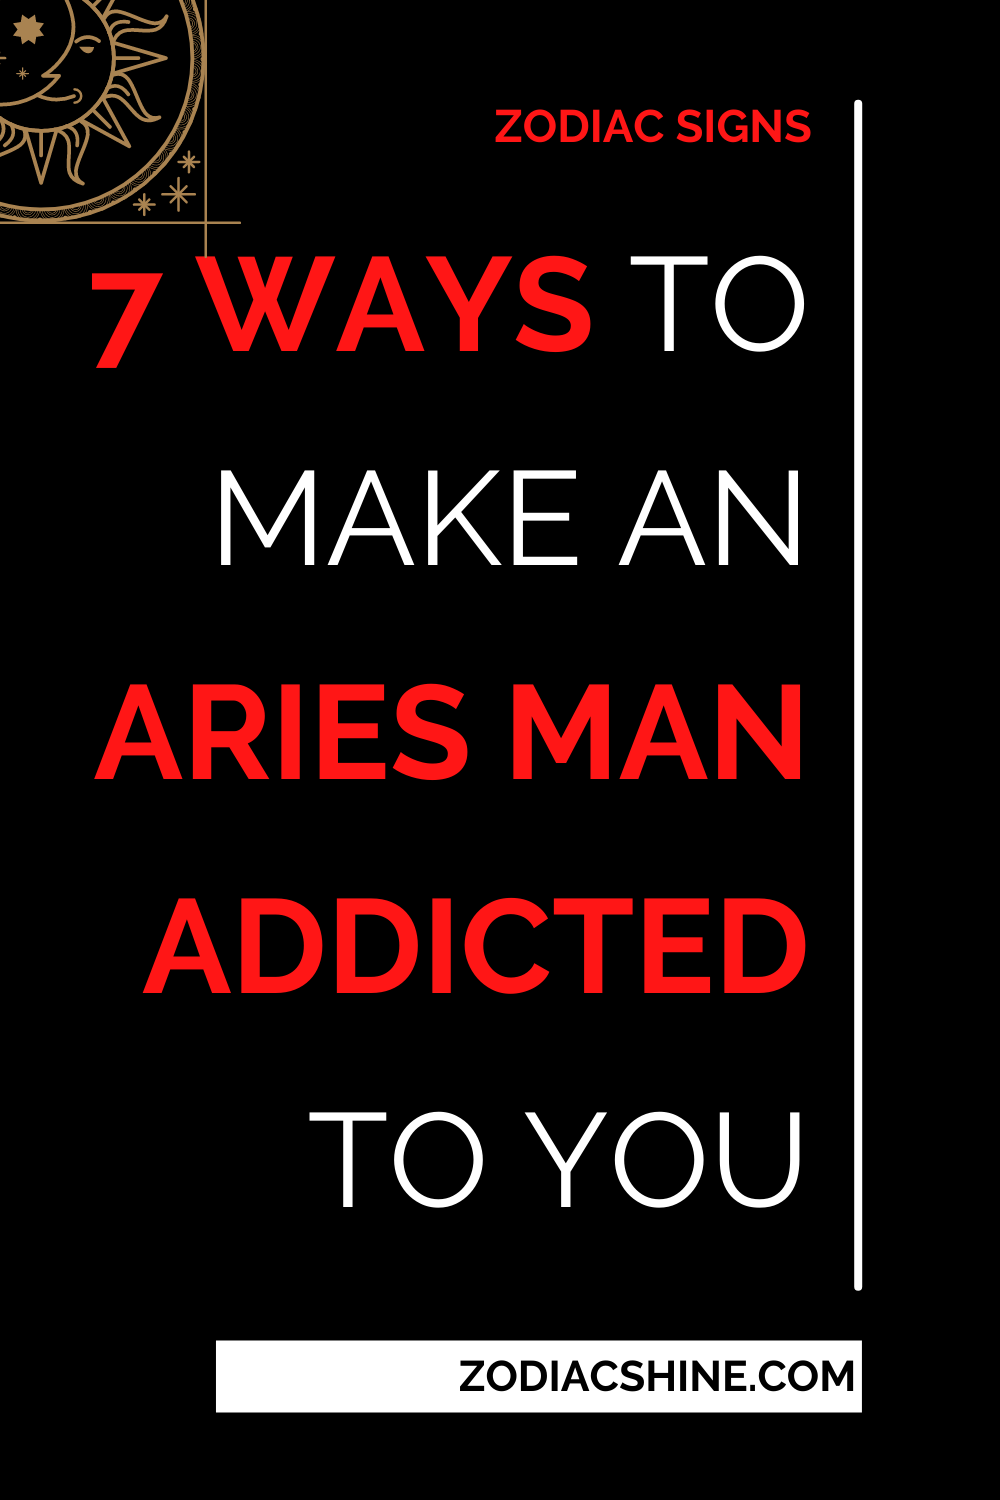 7 Ways To Make An Aries Man Addicted To You